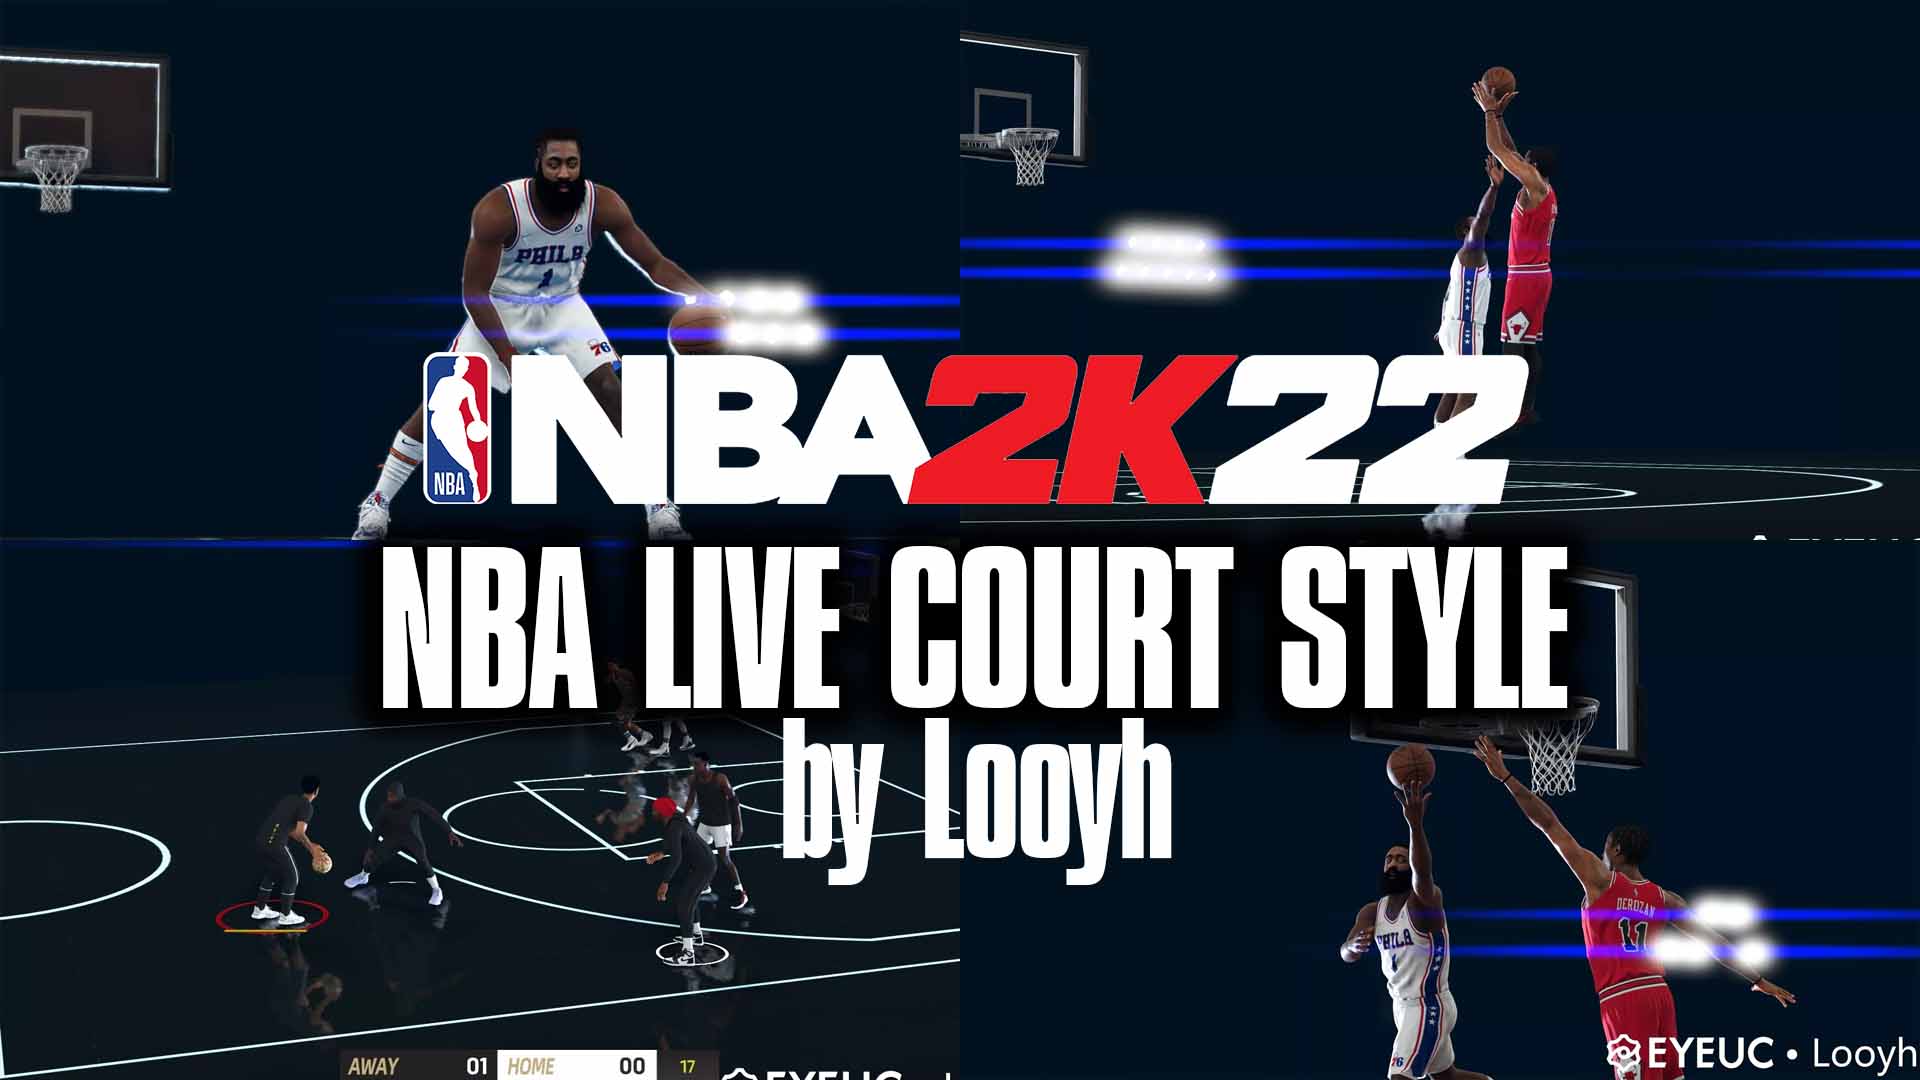 NBA 2K22 NBA Live Arena and Court Style by Looyh